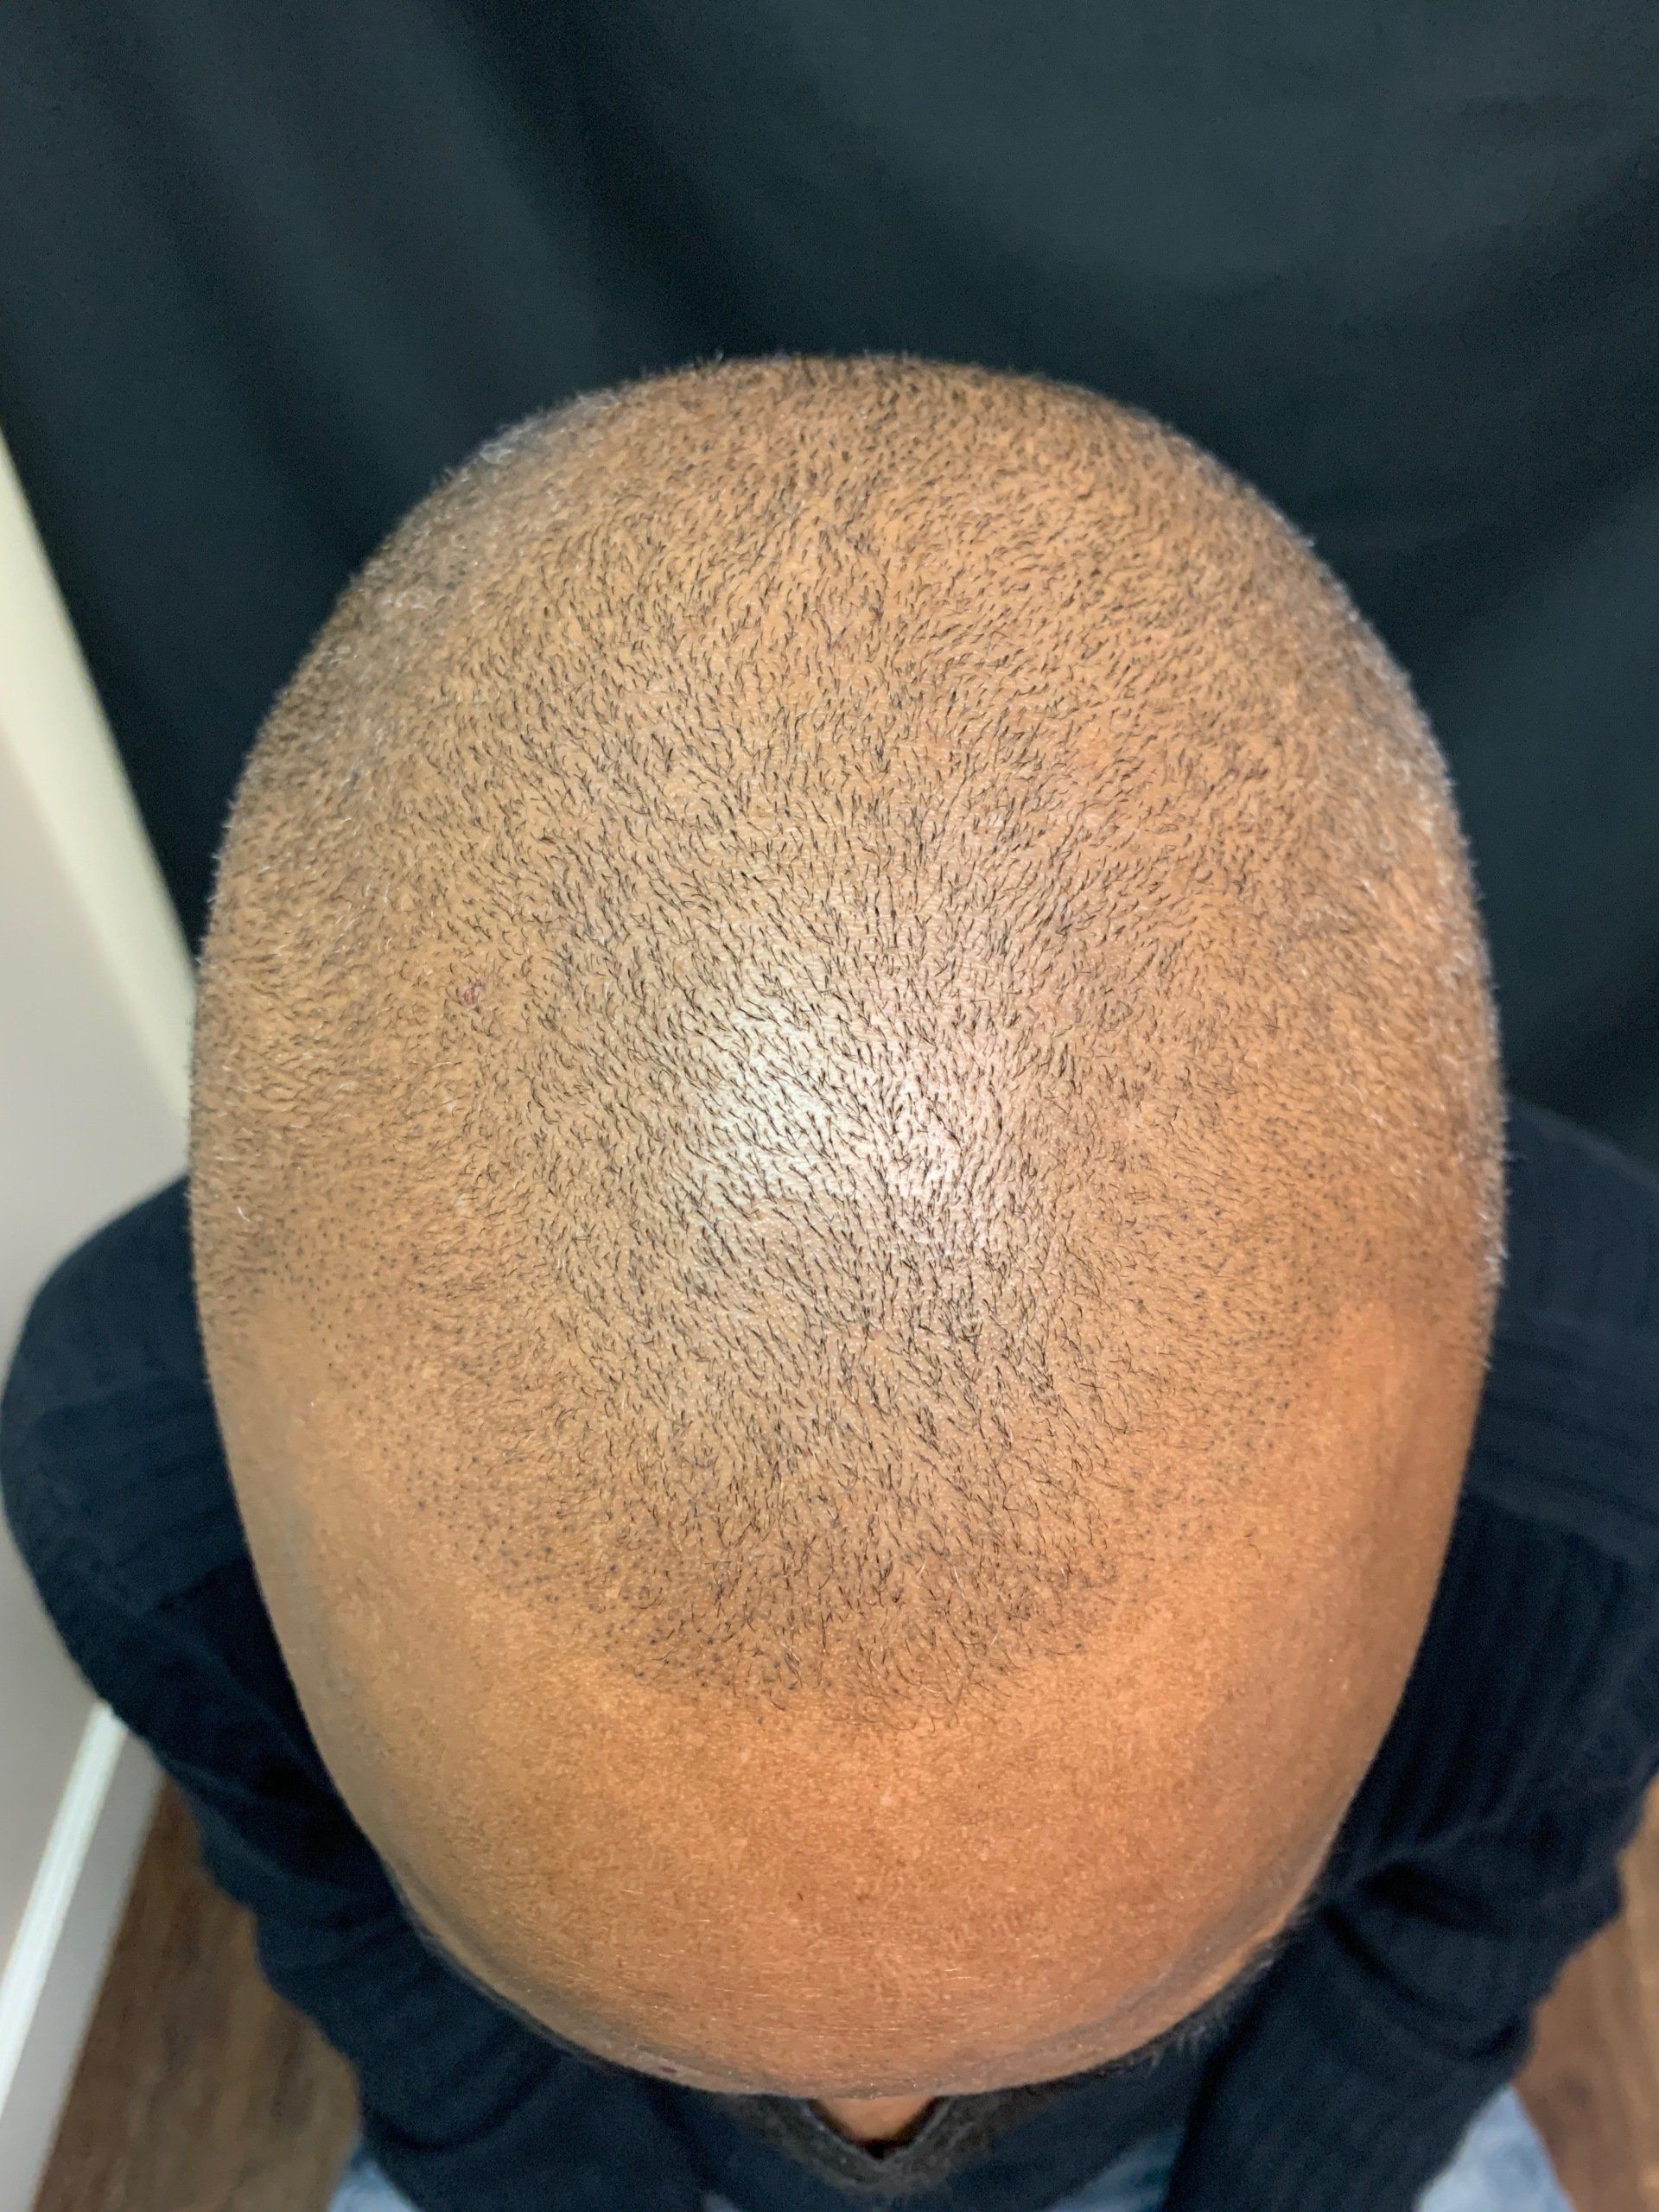 A male after getting scalp micropigmentation to help with receding hairline